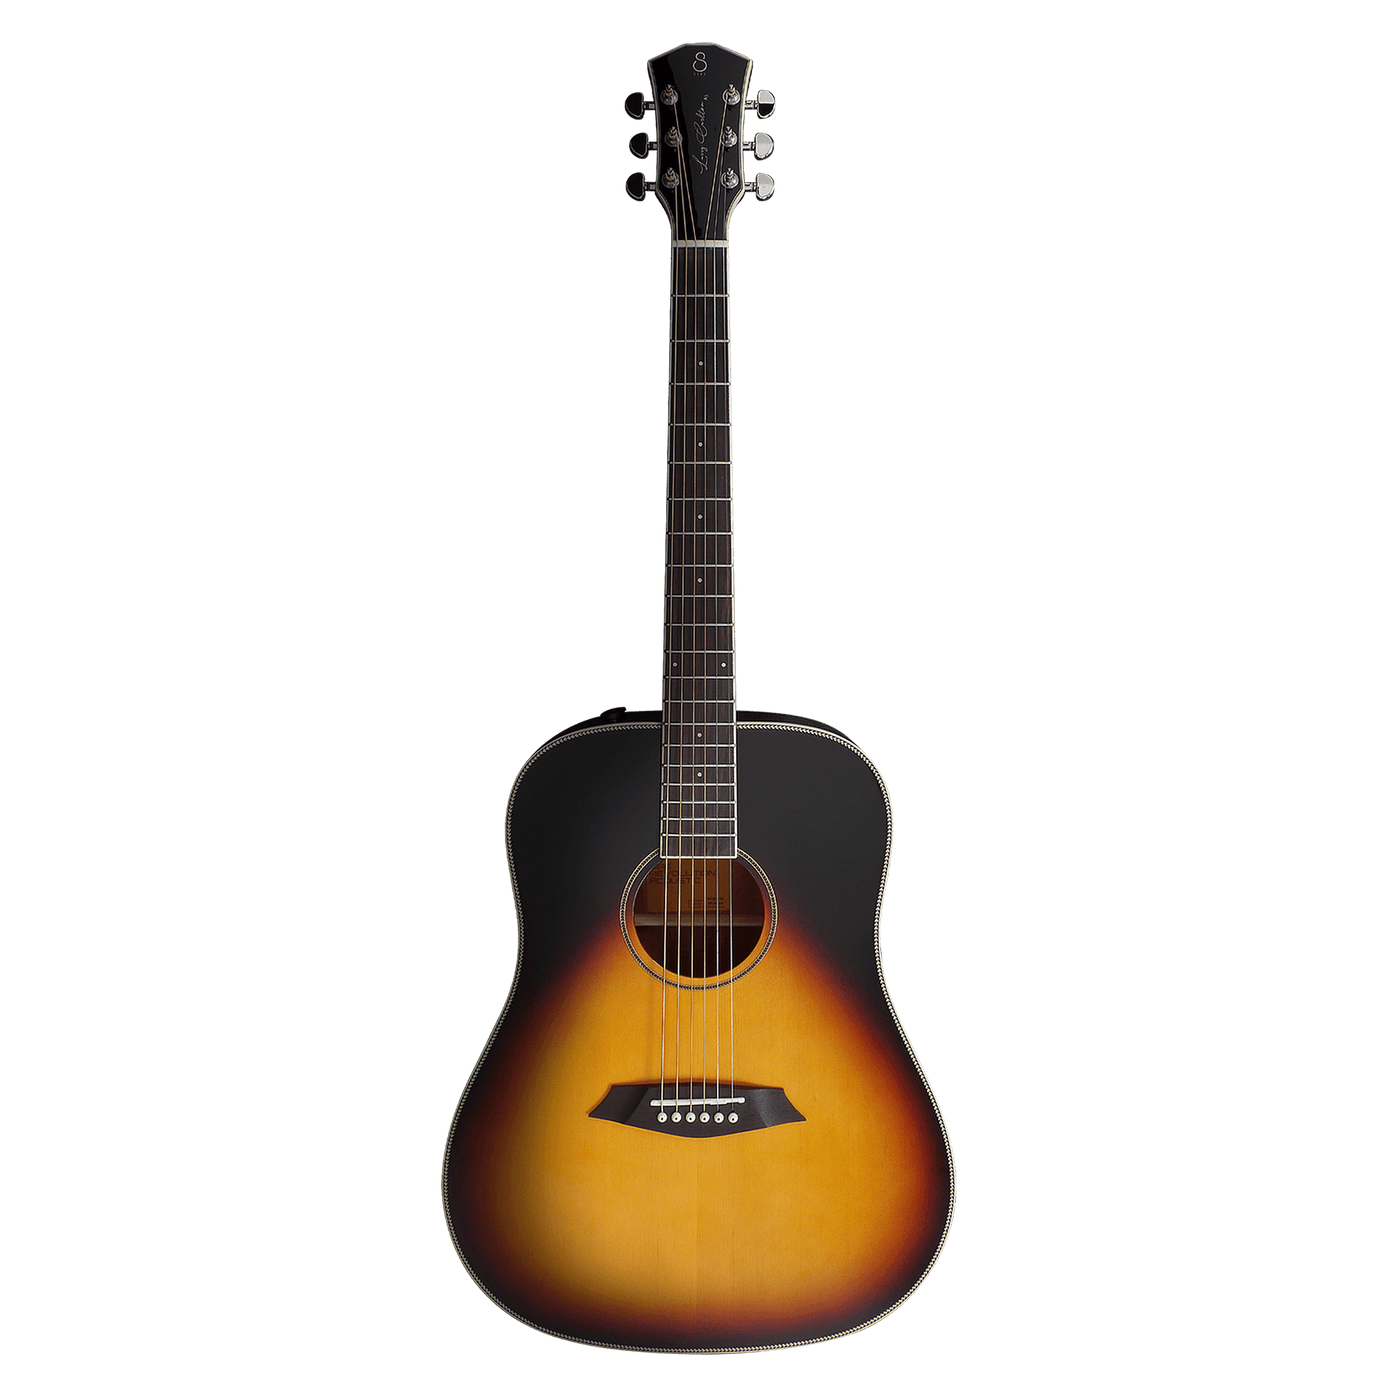 Sire A3-D Vintage Sunburst - $699990 - Gearhub - The Sire A3 is the pioneer solid top acoustic guitar in the Larry Carlton acoustic guitars line, which offers equilibrium between the cutting-edge design and excellent performance. The A3 has two body shapes, Dreadnought and Grand Auditorium. It's added with the custom shop feature rolled fretboard edges to provide a more comfortable, and natural grip. Cuerpo • Modelo: Larry Carlton A3-D (Dreadnought)• Top: Roasted Solid Spruce• Sides: Mahogany• Top: Solid Ma